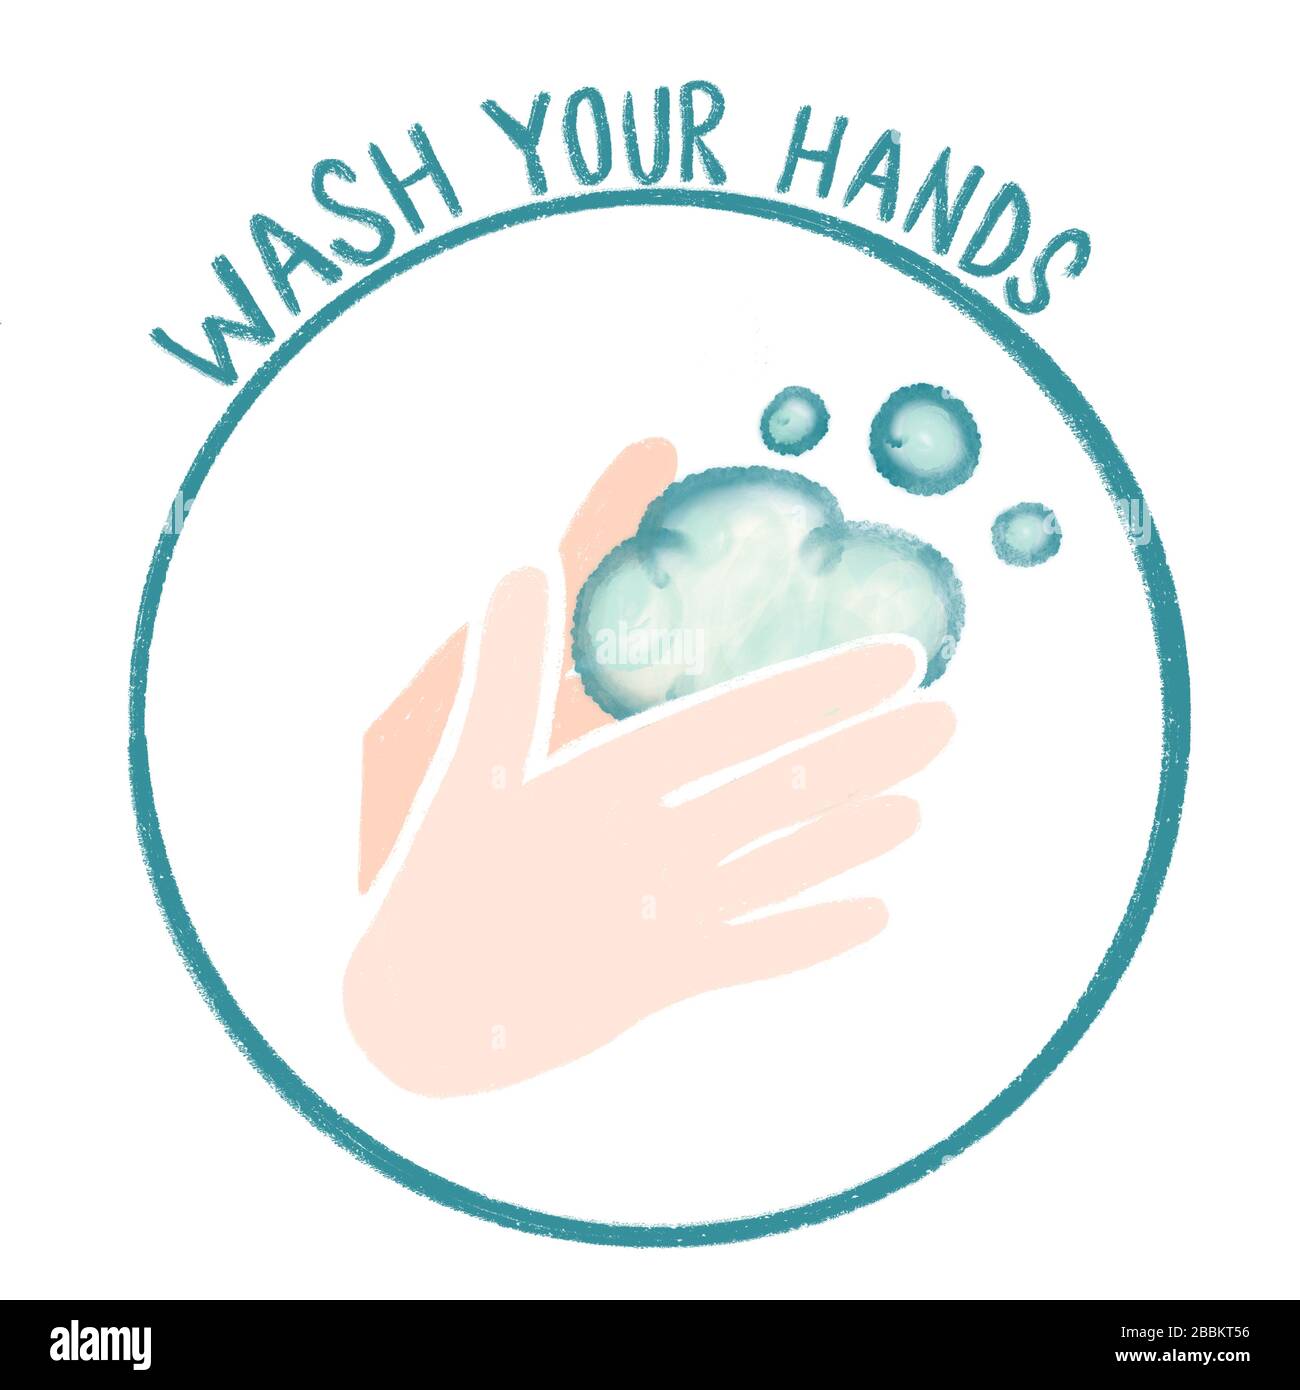 Hand sanitizing wash your hands illustration. COVID 19, corona virus protection. Hand drawn illustration hands and soap bubbles. Stock Photo